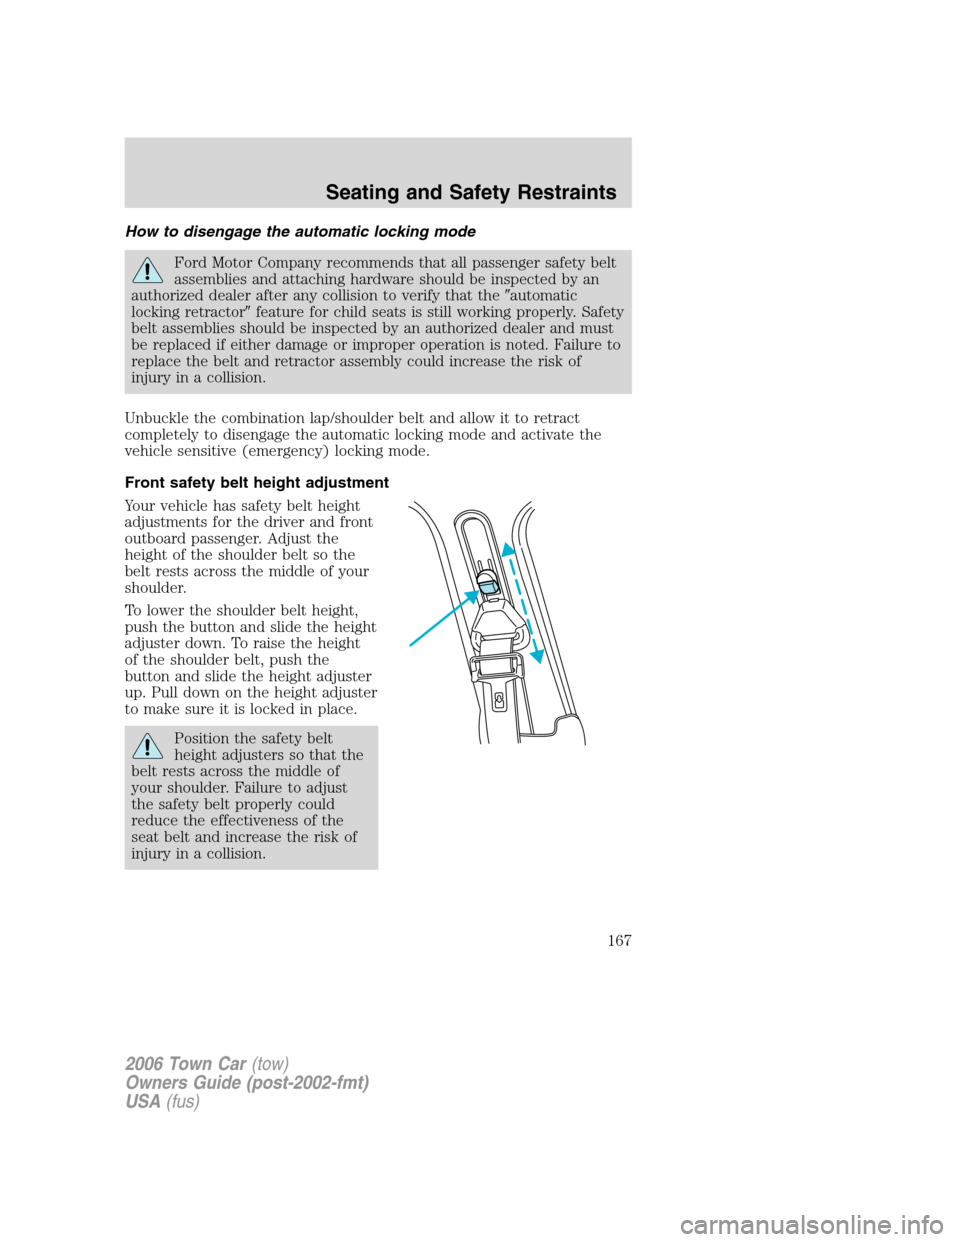 LINCOLN TOWN CAR 2006 User Guide How to disengage the automatic locking mode
Ford Motor Company recommends that all passenger safety belt
assemblies and attaching hardware should be inspected by an
authorized dealer after any collisi